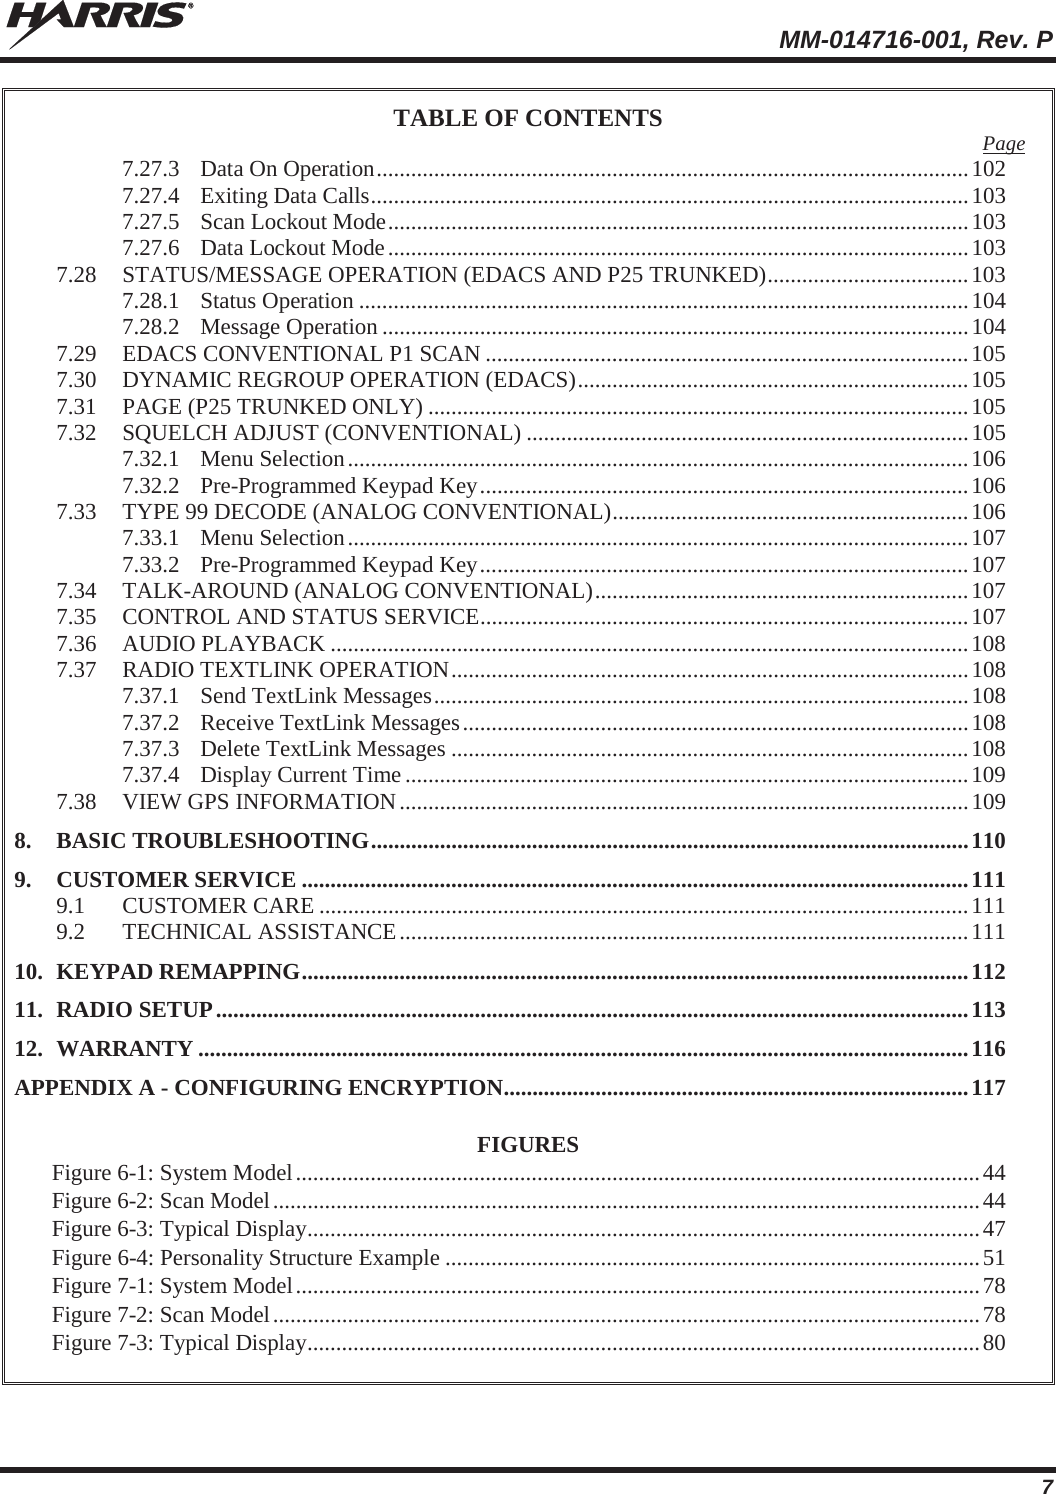  MM-014716-001, Rev. P 7 TABLE OF CONTENTS Page 7.27.3 Data On Operation ....................................................................................................... 102 7.27.4 Exiting Data Calls ........................................................................................................ 103 7.27.5 Scan Lockout Mode ..................................................................................................... 103 7.27.6 Data Lockout Mode ..................................................................................................... 103 7.28 STATUS/MESSAGE OPERATION (EDACS AND P25 TRUNKED) ................................... 103 7.28.1 Status Operation .......................................................................................................... 104 7.28.2 Message Operation ...................................................................................................... 104 7.29 EDACS CONVENTIONAL P1 SCAN .................................................................................... 105 7.30 DYNAMIC REGROUP OPERATION (EDACS) ....................................................................  105 7.31 PAGE (P25 TRUNKED ONLY) .............................................................................................. 105 7.32 SQUELCH ADJUST (CONVENTIONAL) ............................................................................. 105 7.32.1 Menu  Selection ............................................................................................................ 106 7.32.2 Pre-Programmed Keypad Key ..................................................................................... 106 7.33 TYPE 99 DECODE (ANALOG CONVENTIONAL)  .............................................................. 106 7.33.1 Menu  Selection ............................................................................................................ 107 7.33.2 Pre-Programmed Keypad Key ..................................................................................... 107 7.34 TALK-AROUND (ANALOG CONVENTIONAL) .................................................................  107 7.35 CONTROL AND STATUS SERVICE ..................................................................................... 107 7.36 AUDIO PLAYBACK ............................................................................................................... 108 7.37 RADIO TEXTLINK OPERATION .......................................................................................... 108 7.37.1 Send TextLink Messages ............................................................................................. 108 7.37.2 Receive TextLink Messages ........................................................................................ 108 7.37.3 Delete TextLink Messages .......................................................................................... 108 7.37.4 Display Current Time .................................................................................................. 109 7.38 VIEW GPS INFORMATION ................................................................................................... 109 8. BASIC TROUBLESHOOTING ........................................................................................................ 110 9. CUSTOMER SERVICE .................................................................................................................... 111 9.1 CUSTOMER CARE ................................................................................................................. 111 9.2 TECHNICAL  ASSISTANCE ................................................................................................... 111 10. KEYPAD REMAPPING .................................................................................................................... 112 11. RADIO SETUP ................................................................................................................................... 113 12. WARRANTY ...................................................................................................................................... 116 APPENDIX A - CONFIGURING ENCRYPTION ................................................................................. 117  FIGURES Figure 6-1: System Model ....................................................................................................................... 44 Figure 6-2: Scan Model ........................................................................................................................... 44 Figure 6-3: Typical Display ..................................................................................................................... 47 Figure 6-4: Personality Structure Example ............................................................................................. 51 Figure 7-1: System Model ....................................................................................................................... 78 Figure 7-2: Scan Model ........................................................................................................................... 78 Figure 7-3: Typical Display ..................................................................................................................... 80   